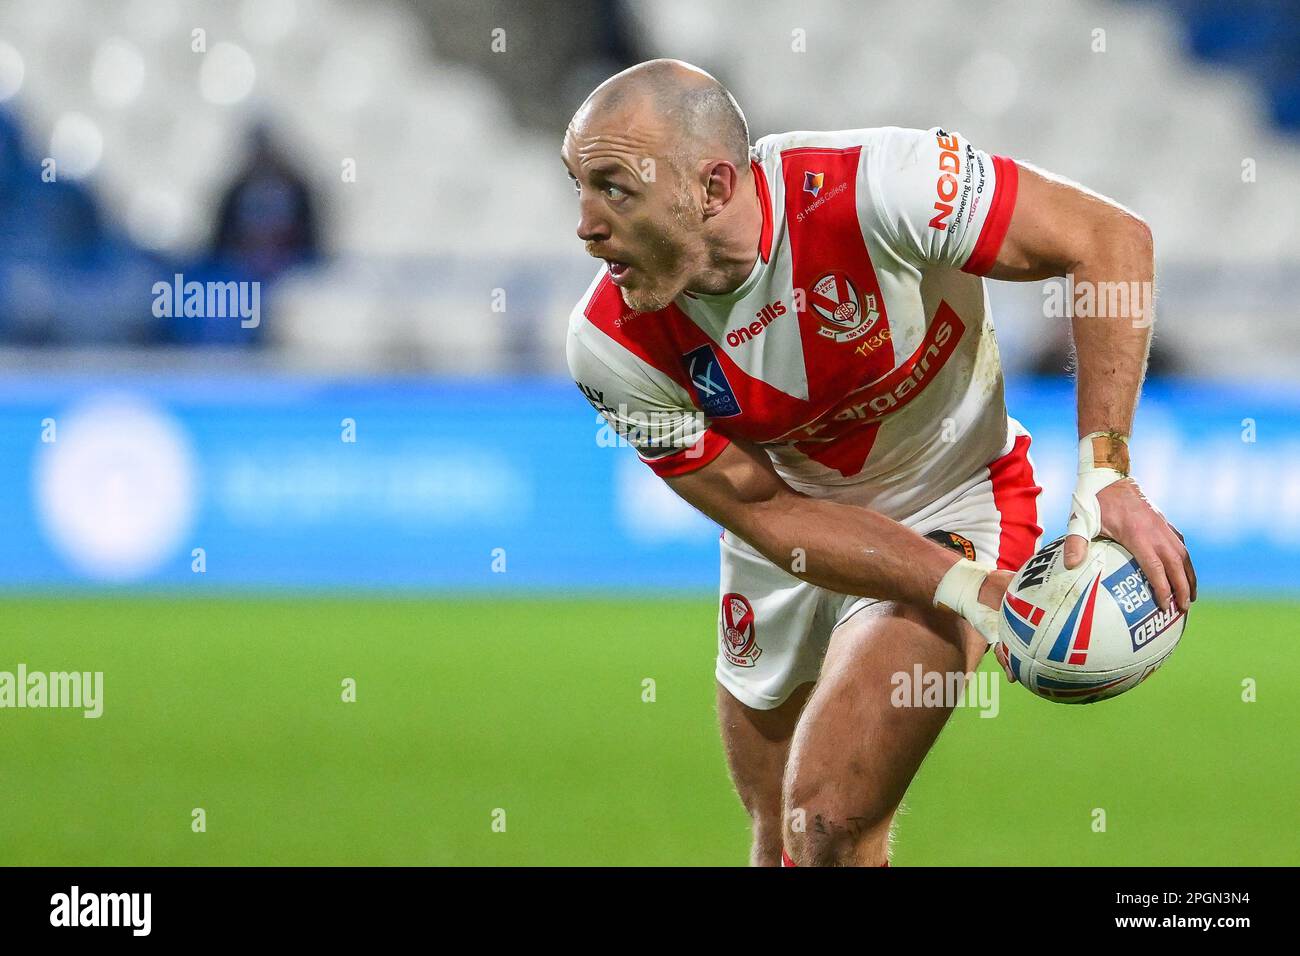 James Roby #9 of St Helens in action during the Betfred Super League Round 6 match Huddersfield Giants vs St Helens at John Smith's Stadium, Huddersfield, United Kingdom, 23rd March 2023  (Photo by Craig Thomas/News Images) Stock Photo